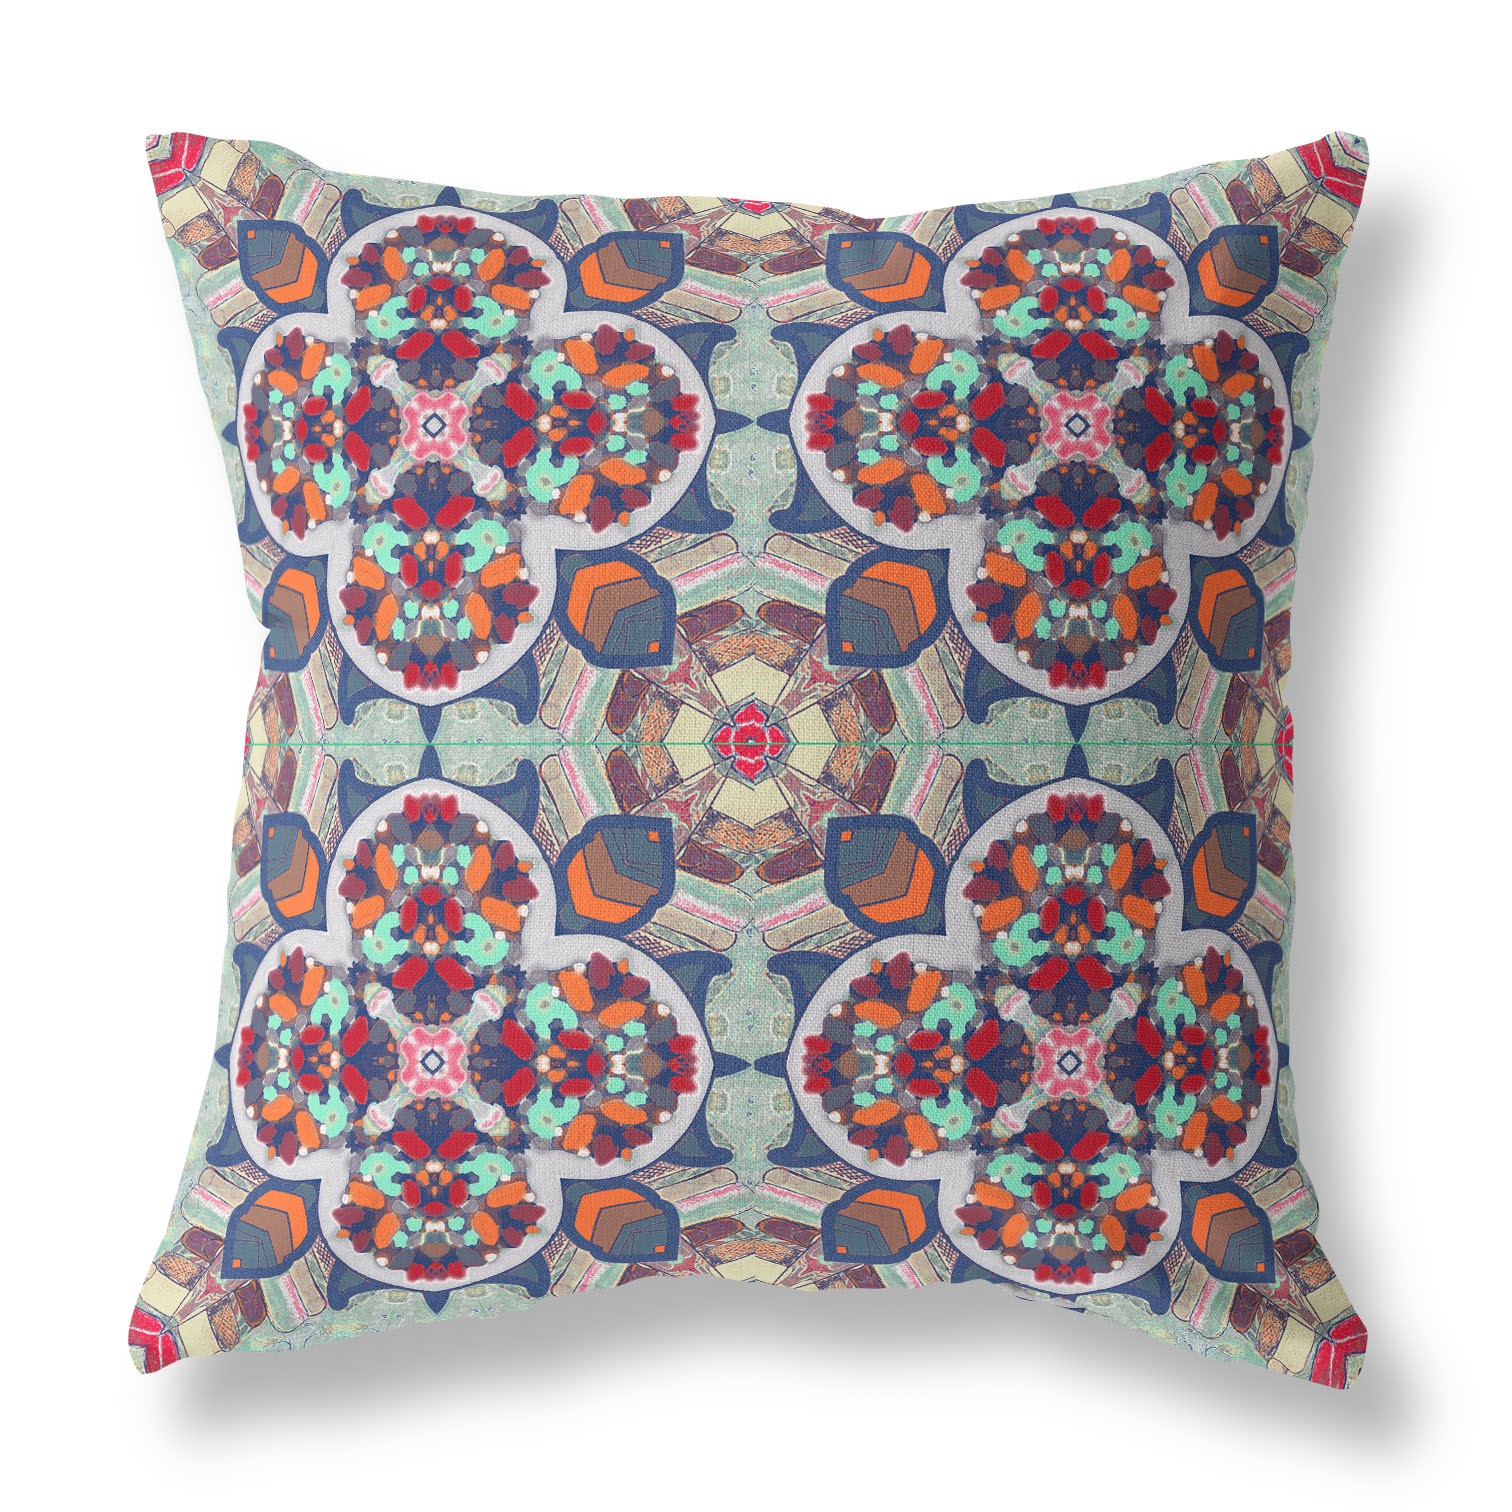 18" X 18" Blue And Orange Zippered Geometric Indoor Outdoor Throw Pillow Cover & Insert-417717-1